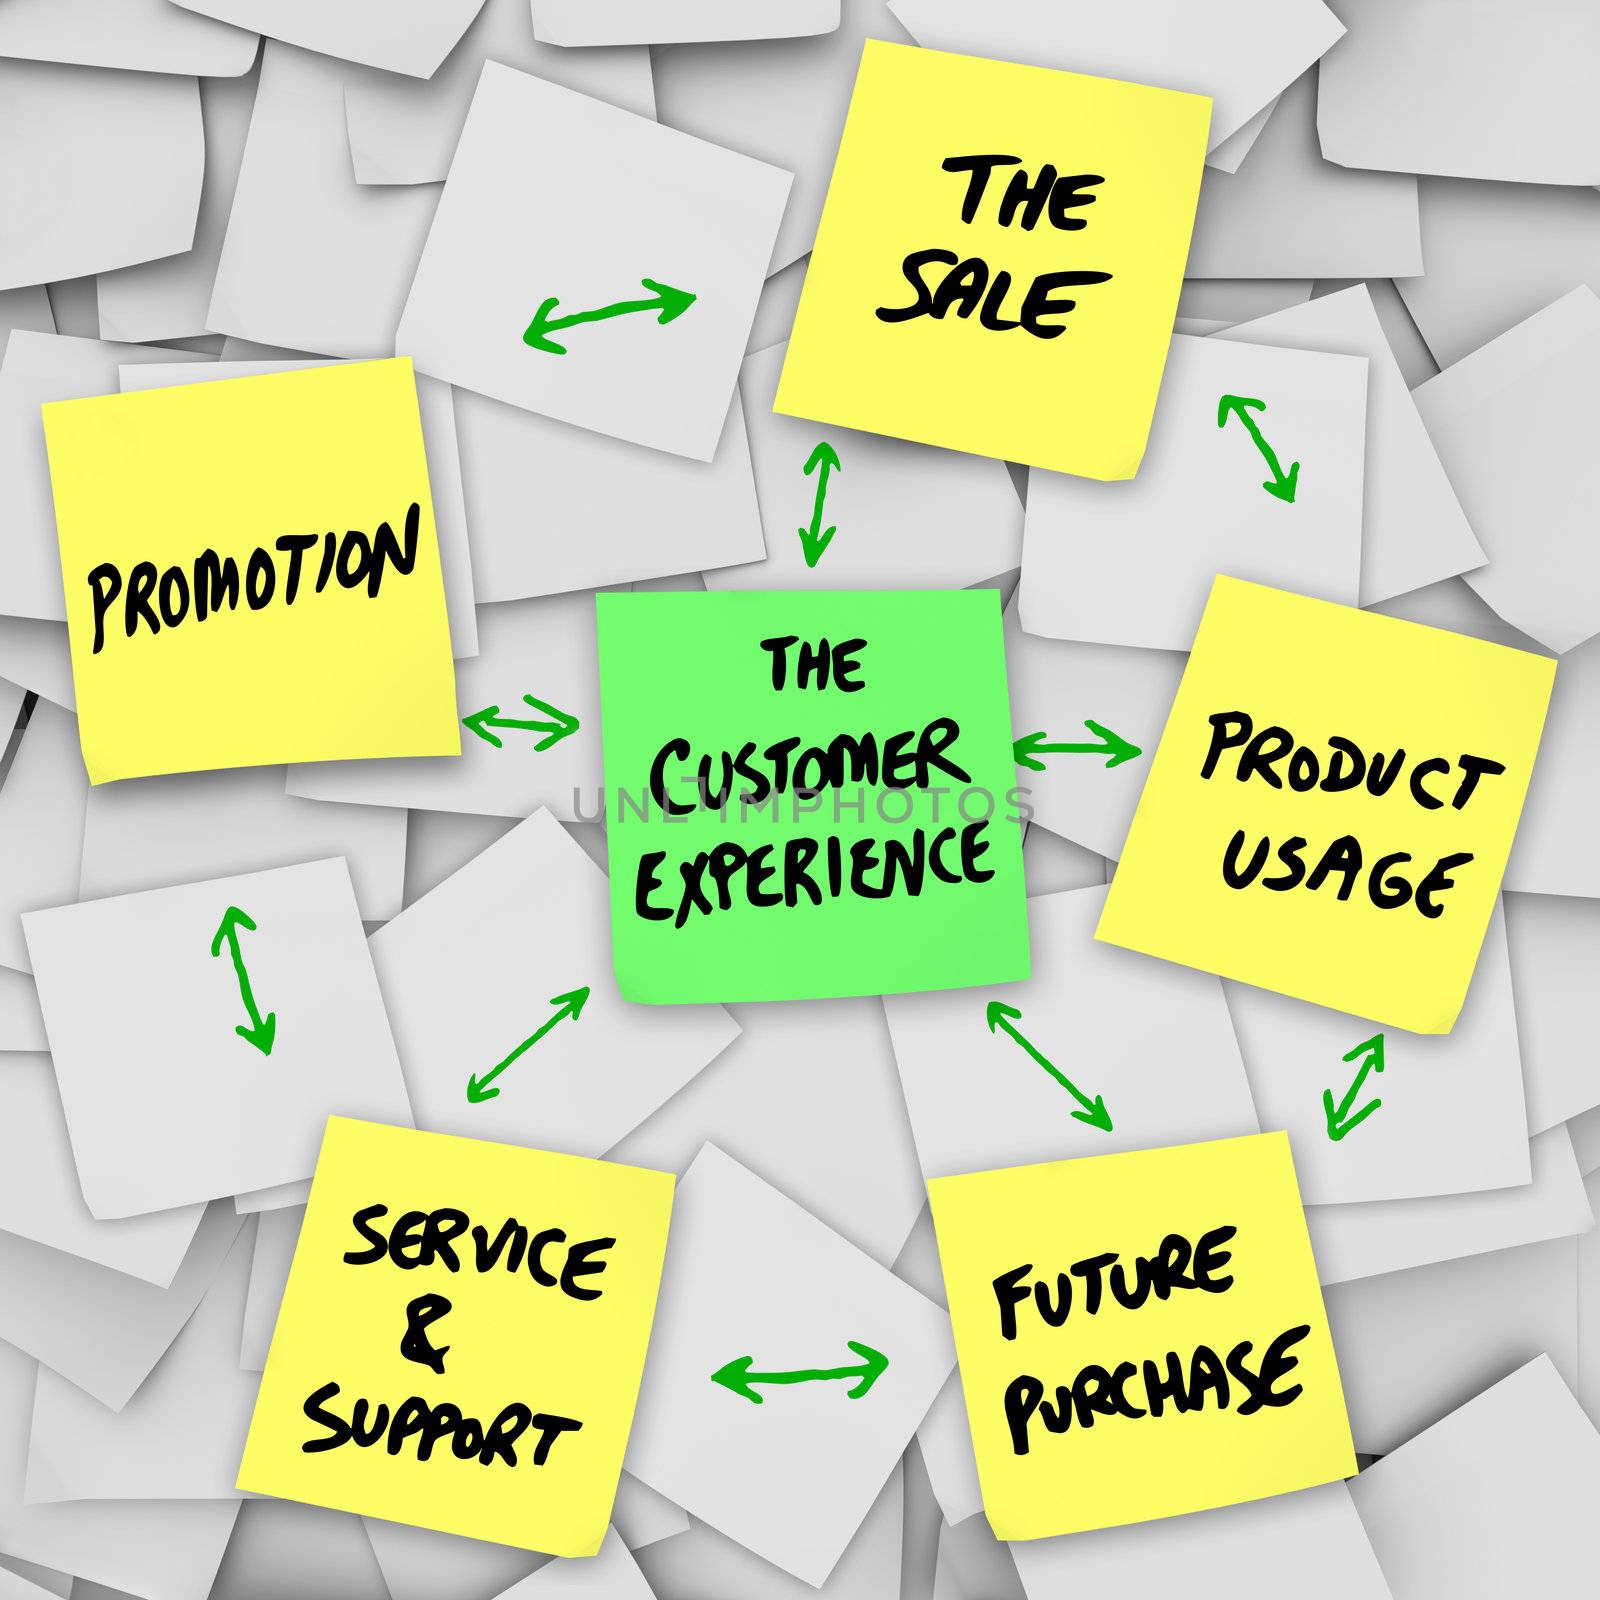 The Customer Experience is illustrated on a number of sticky notes, with these words written on yellow notes: Promotion, Sale, Service and Support, Product Usage, Future Purchase